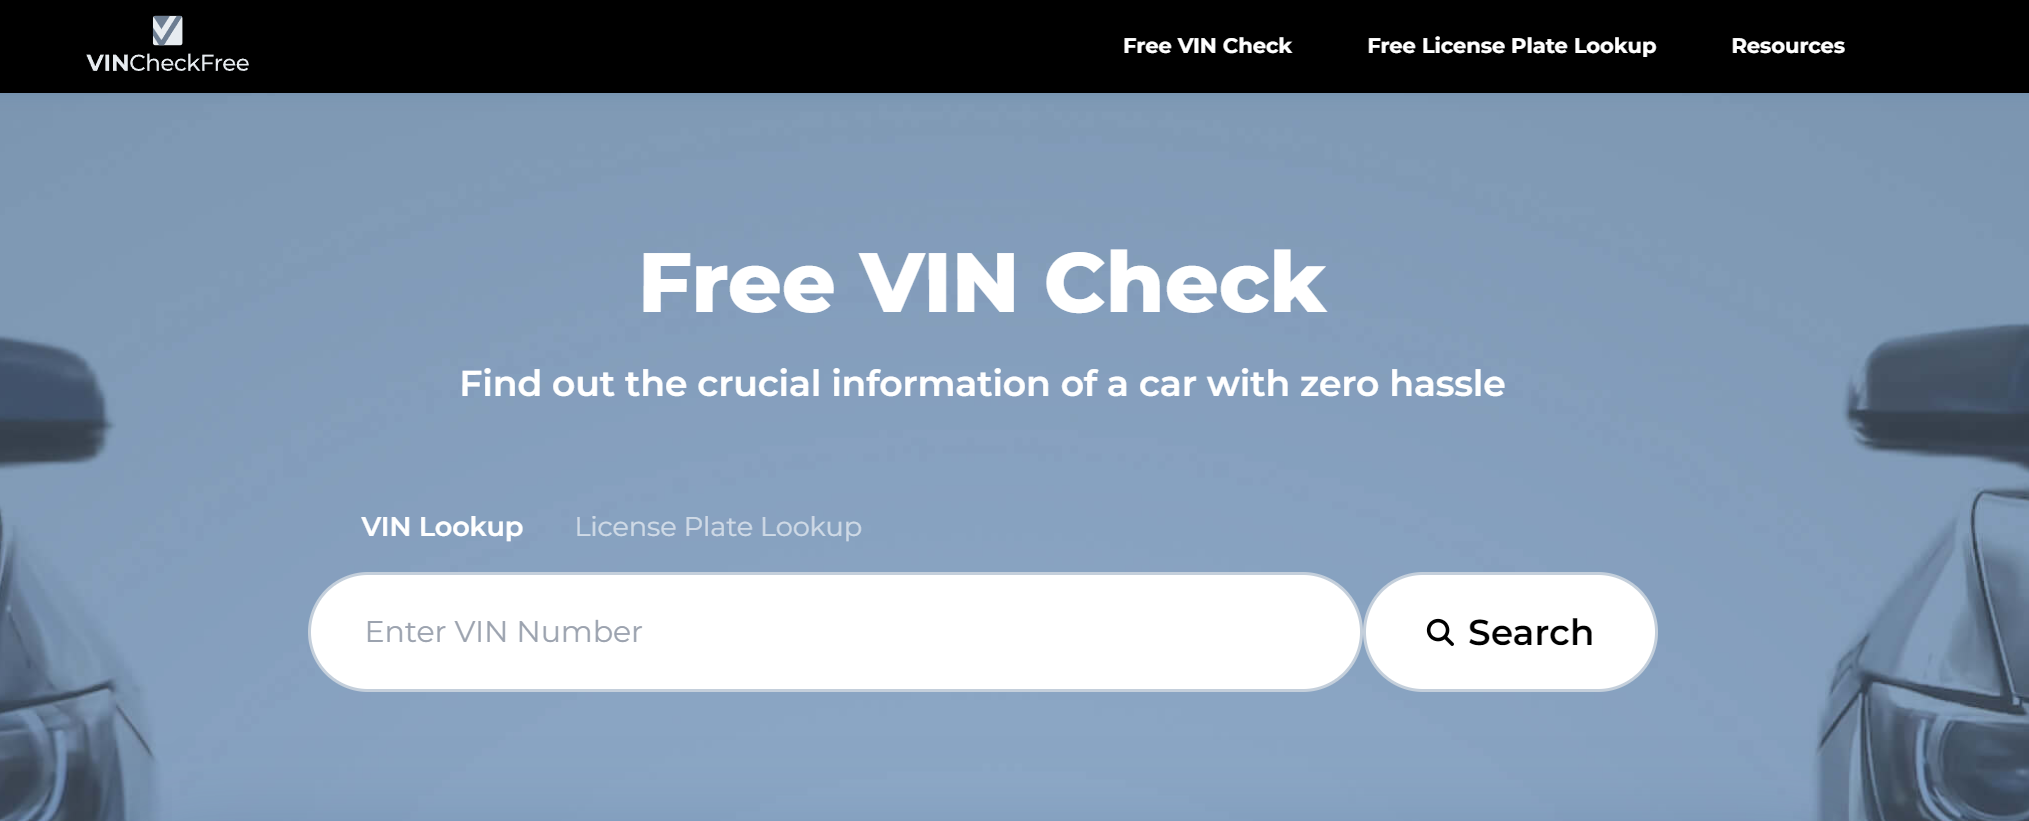 VIN Check Free Review: Simply Type In Any VIN